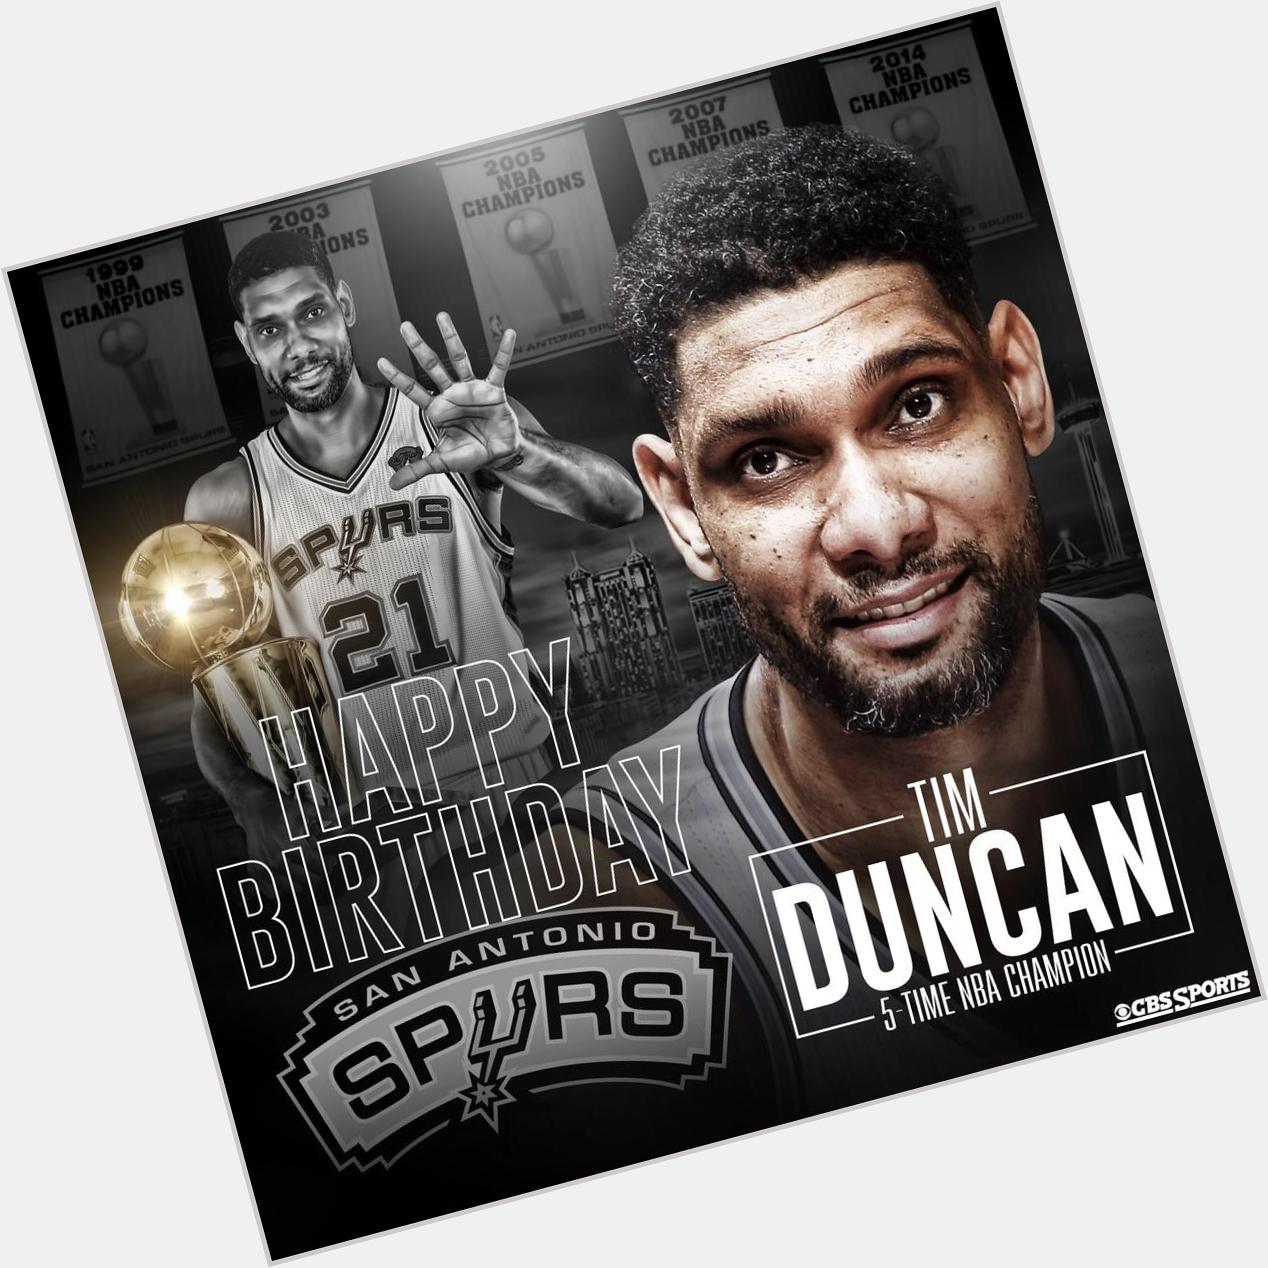 \" HAPPY BIRTHDAY TO THE LEGEND TIM DUNCAN! YOU ARE TRULY AMAZING. GOAT